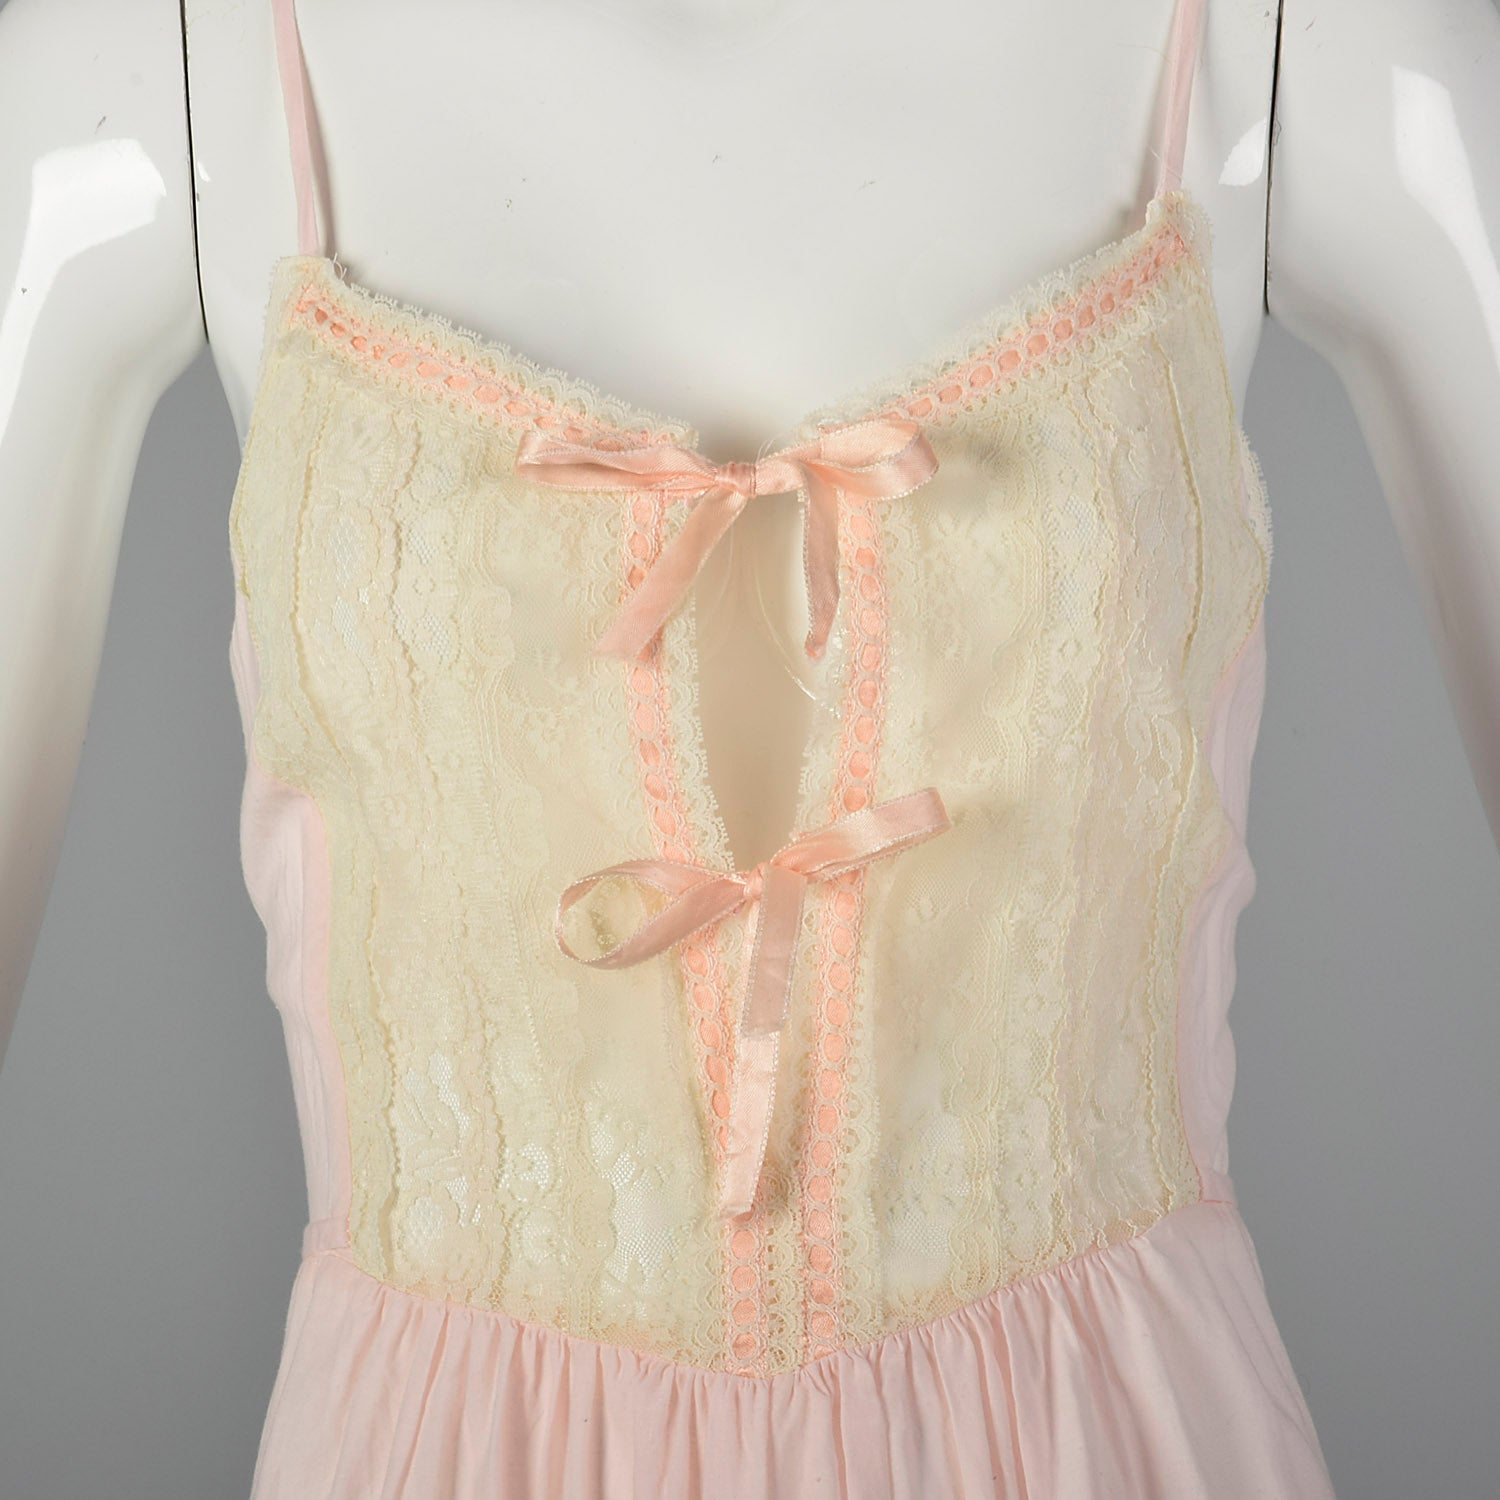 1970s Christian Dior Pink Nightgown